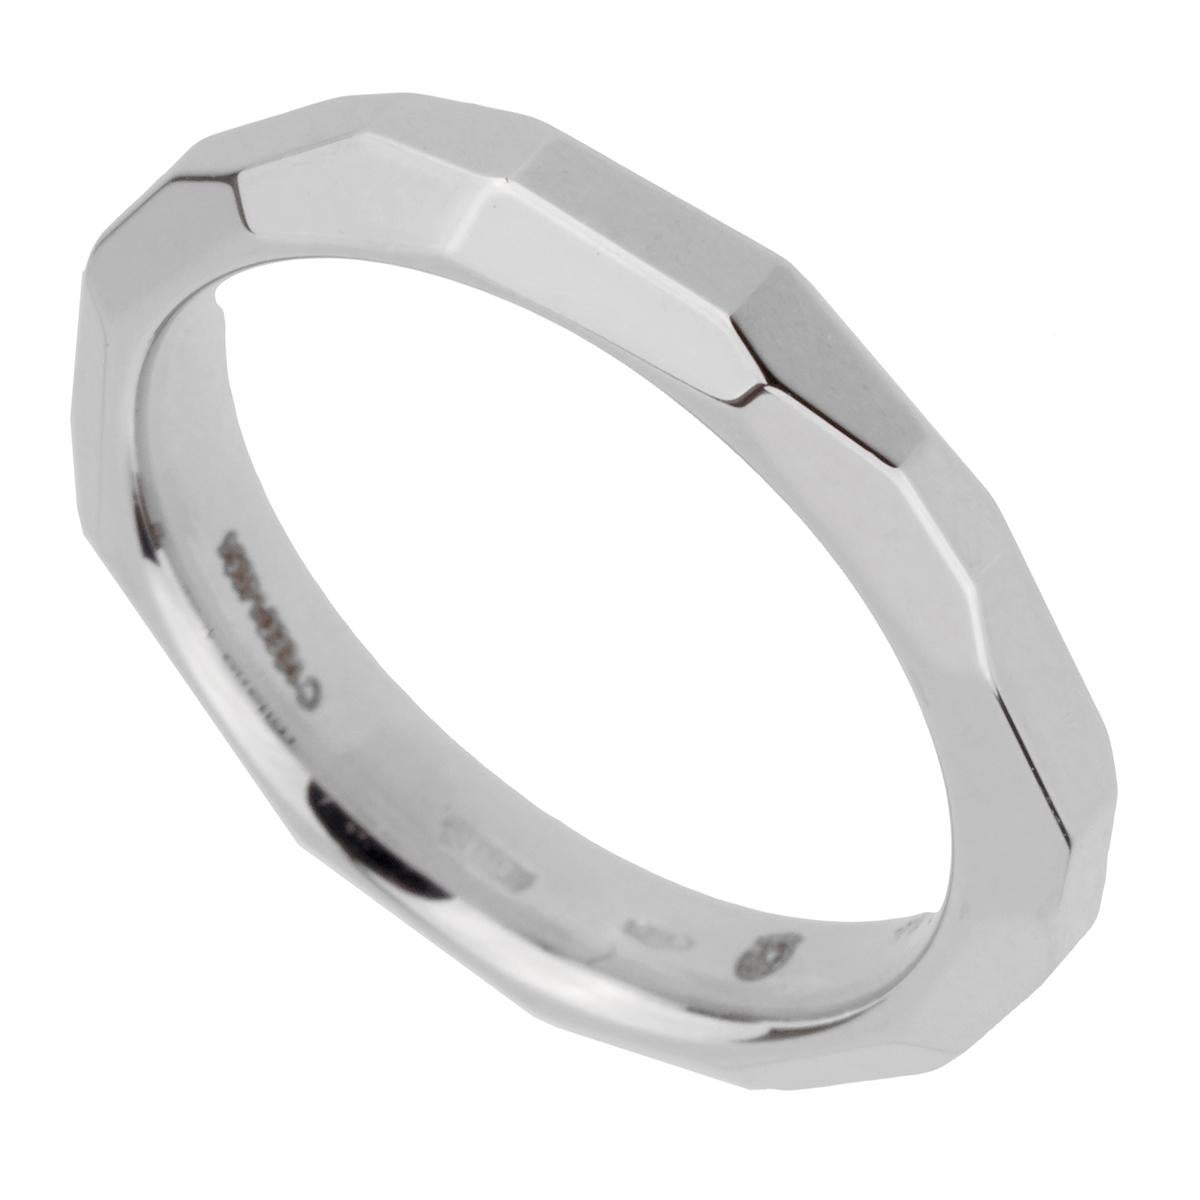 A chic white gold Pomellato band style ring crafted in 18k white gold, The ring measures a size 6.25 and can be resized.

Sku: 2382